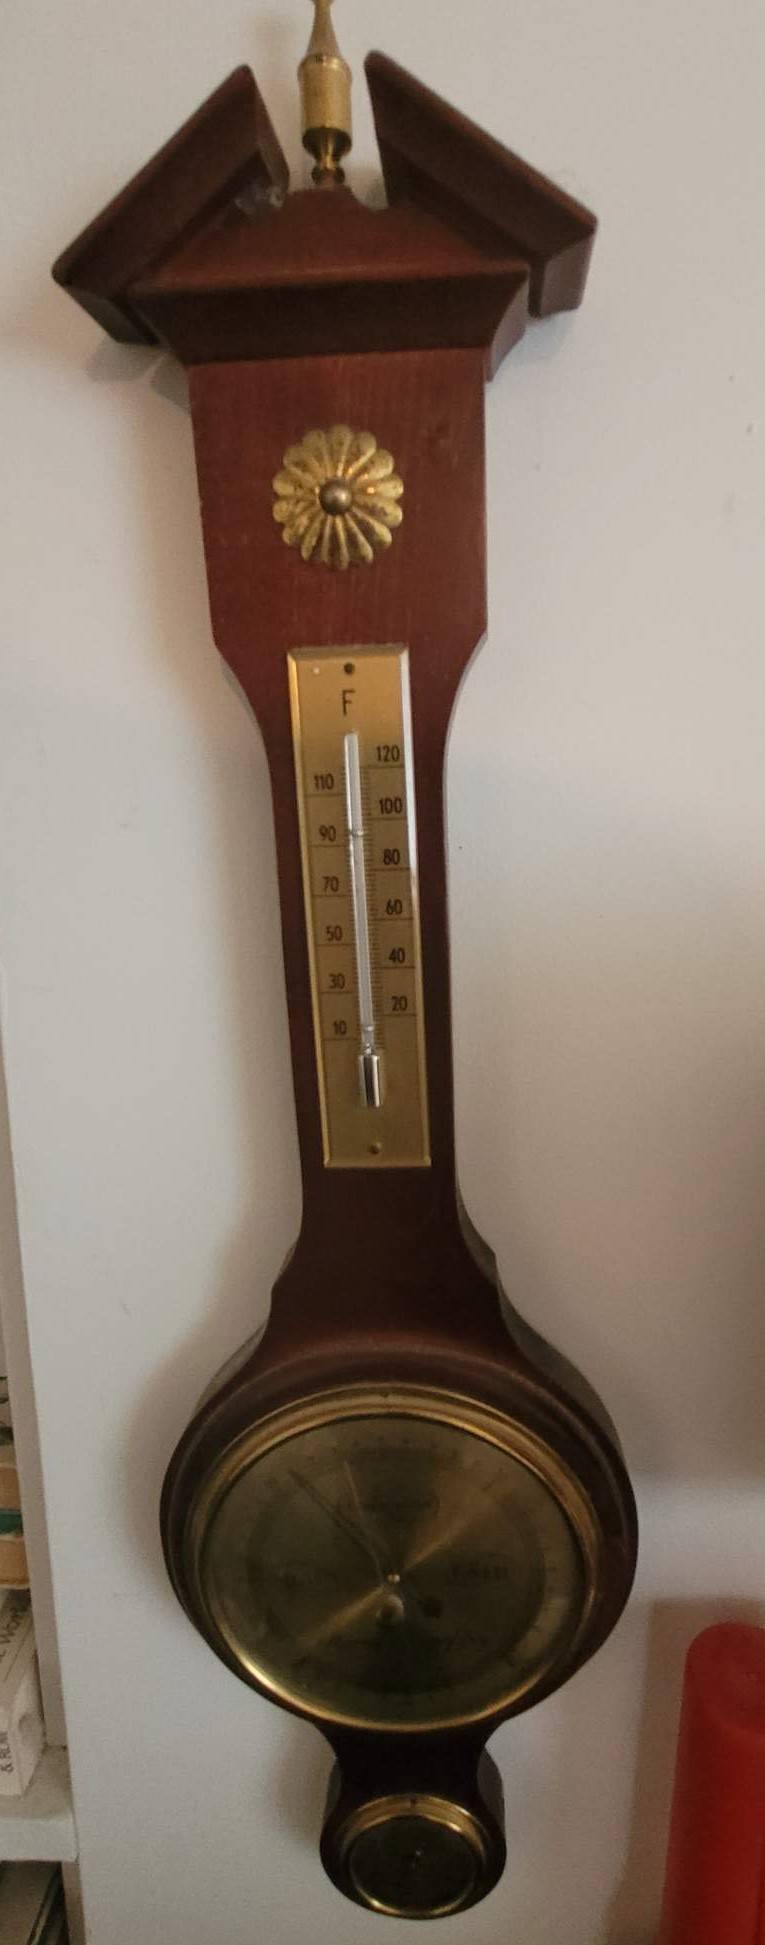 How does a weather barometer work?